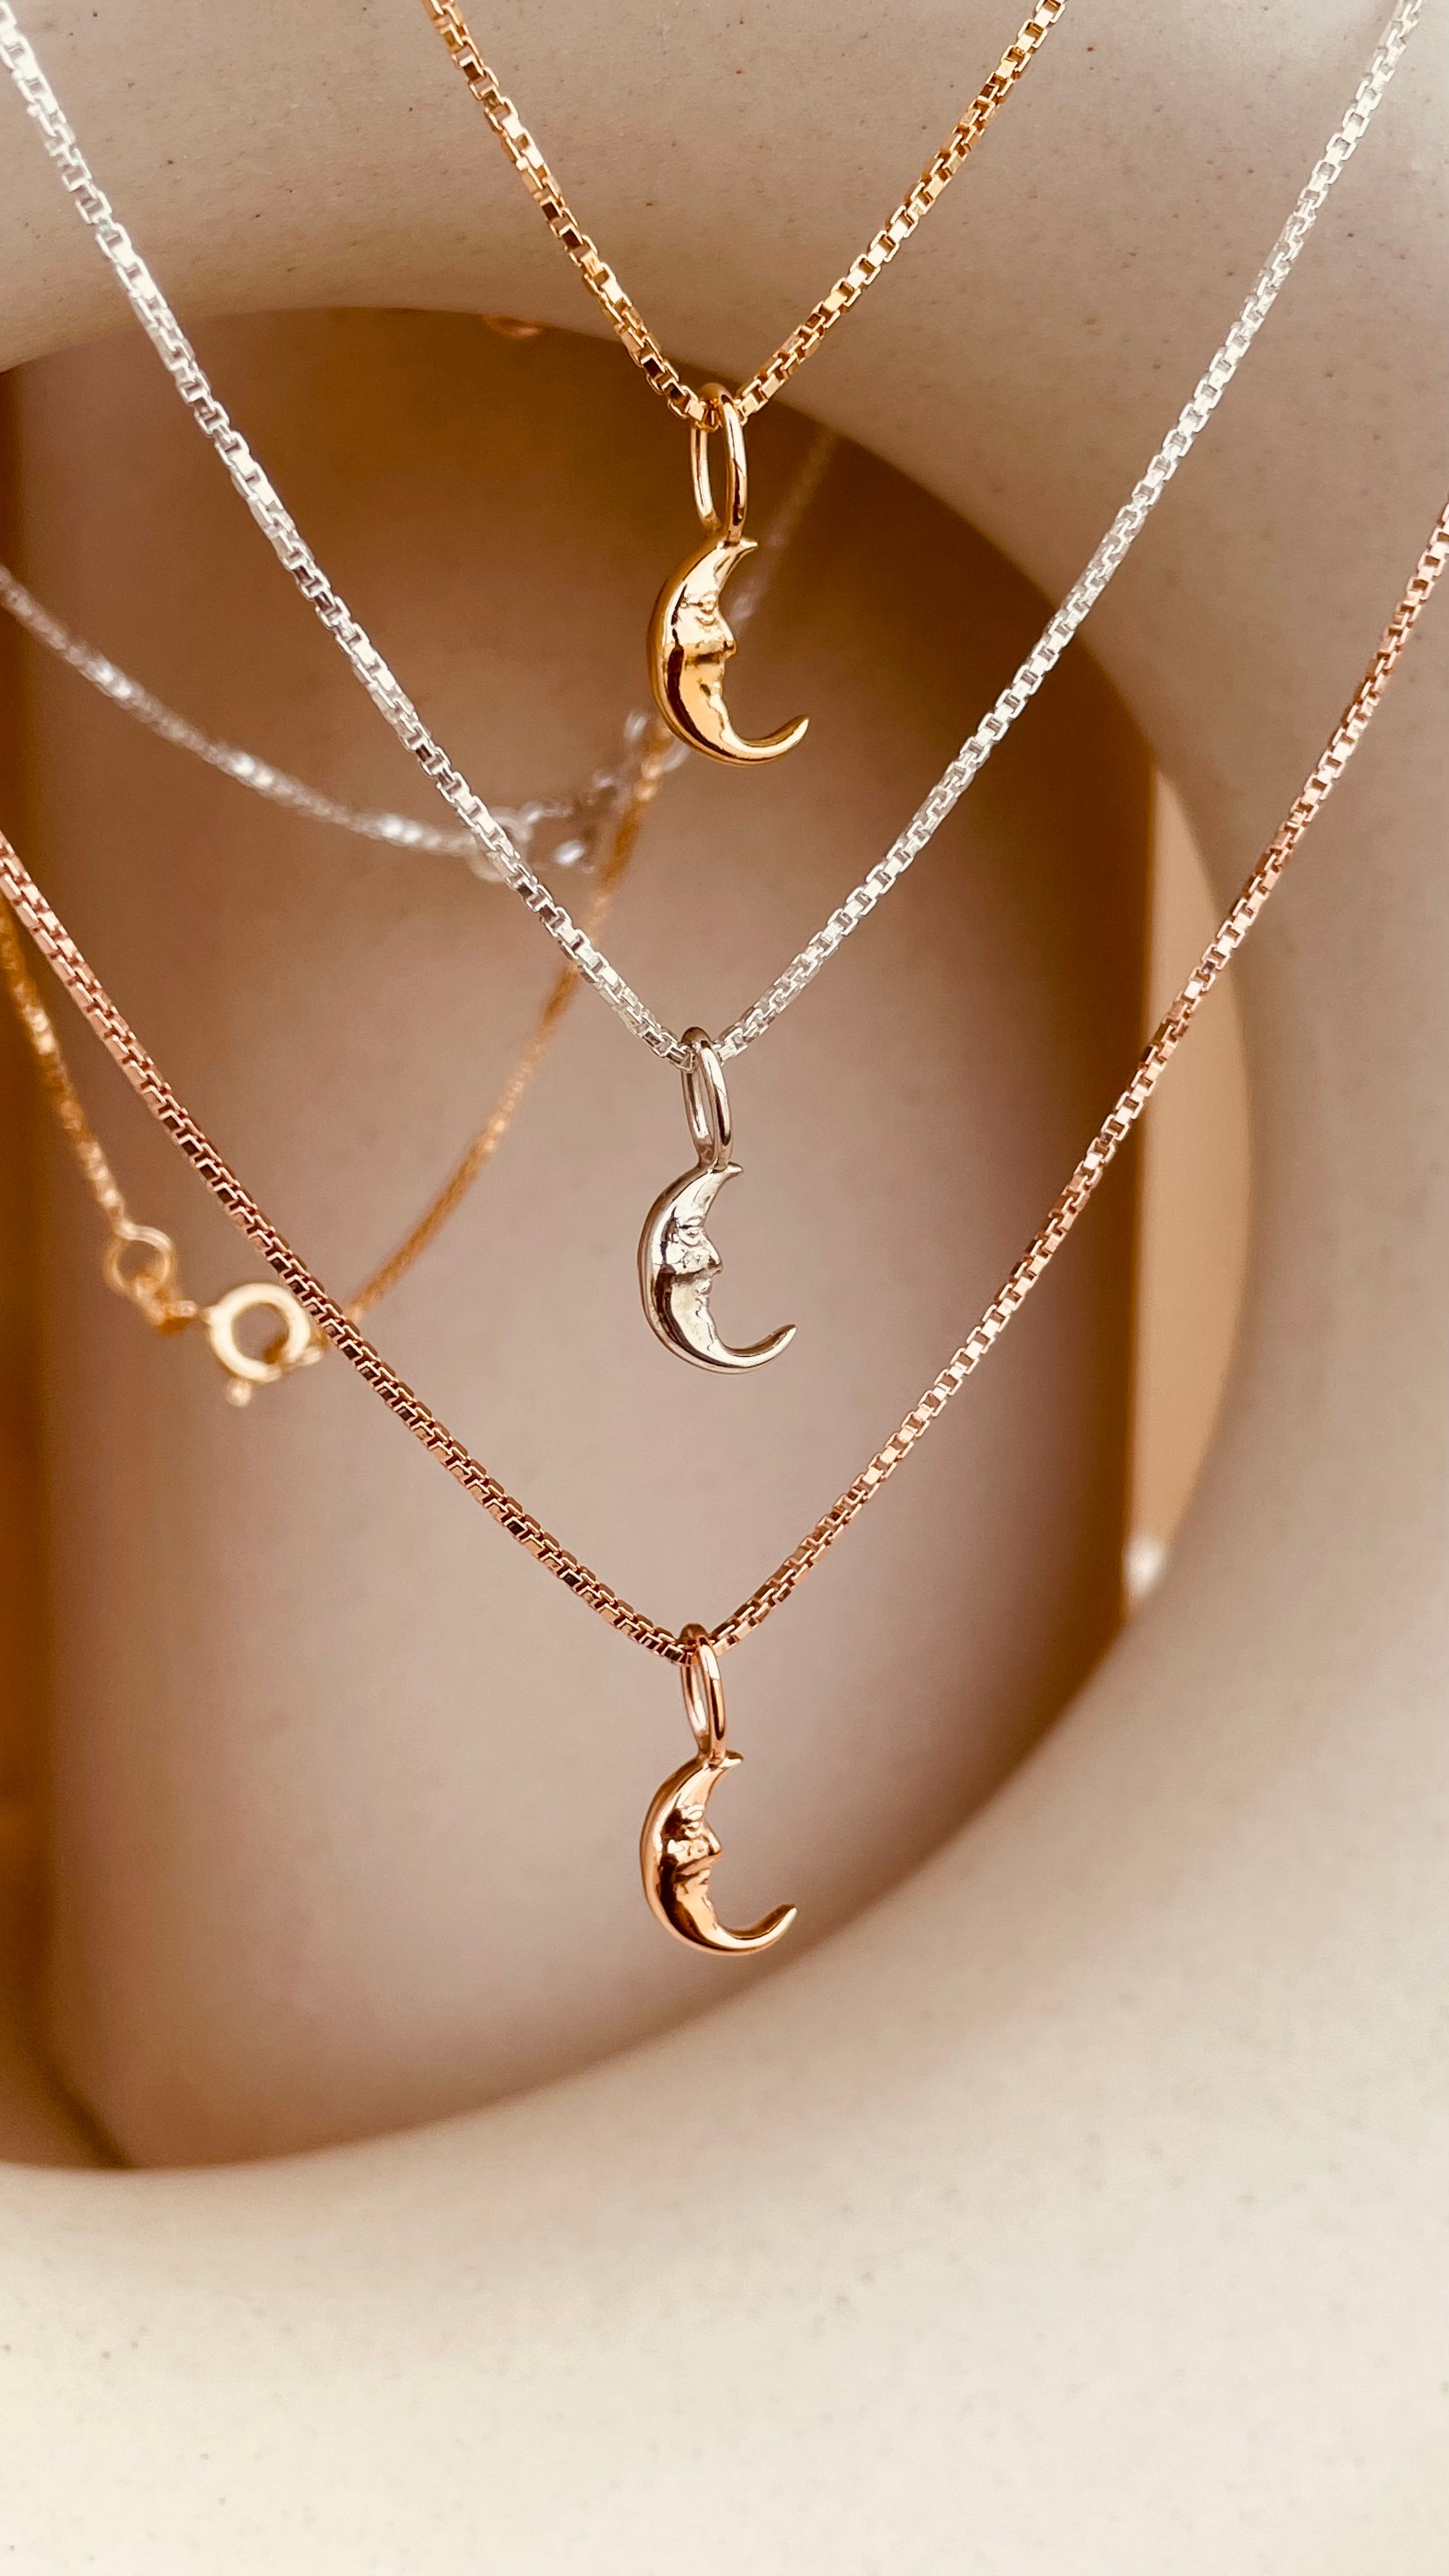 Crescent Moon Necklace with Box Chain - Octonov 